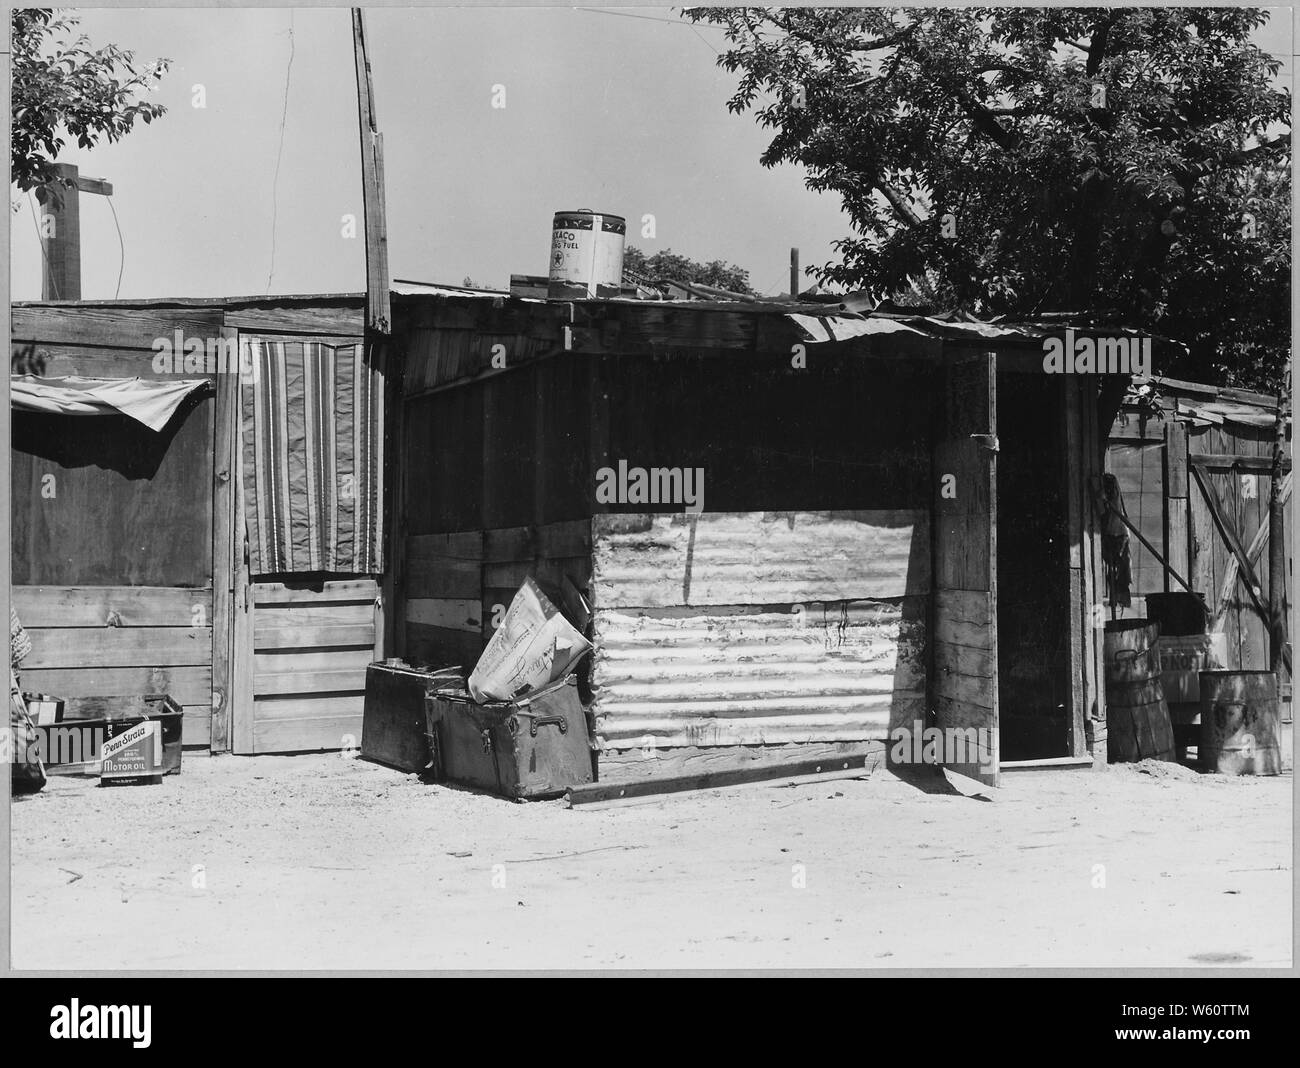 Arvin, Kern County, California. One in a community of shacks in subdivided orchard rented to agricul . . .; Scope and content:  Full caption reads as follows: Arvin, Kern County, California. One in a community of shacks in subdivided orchard rented to agricultural workers as permanent homes. Workers on and off relief. Shacks rent from $7 to $12 per month. No running water. Stock Photo